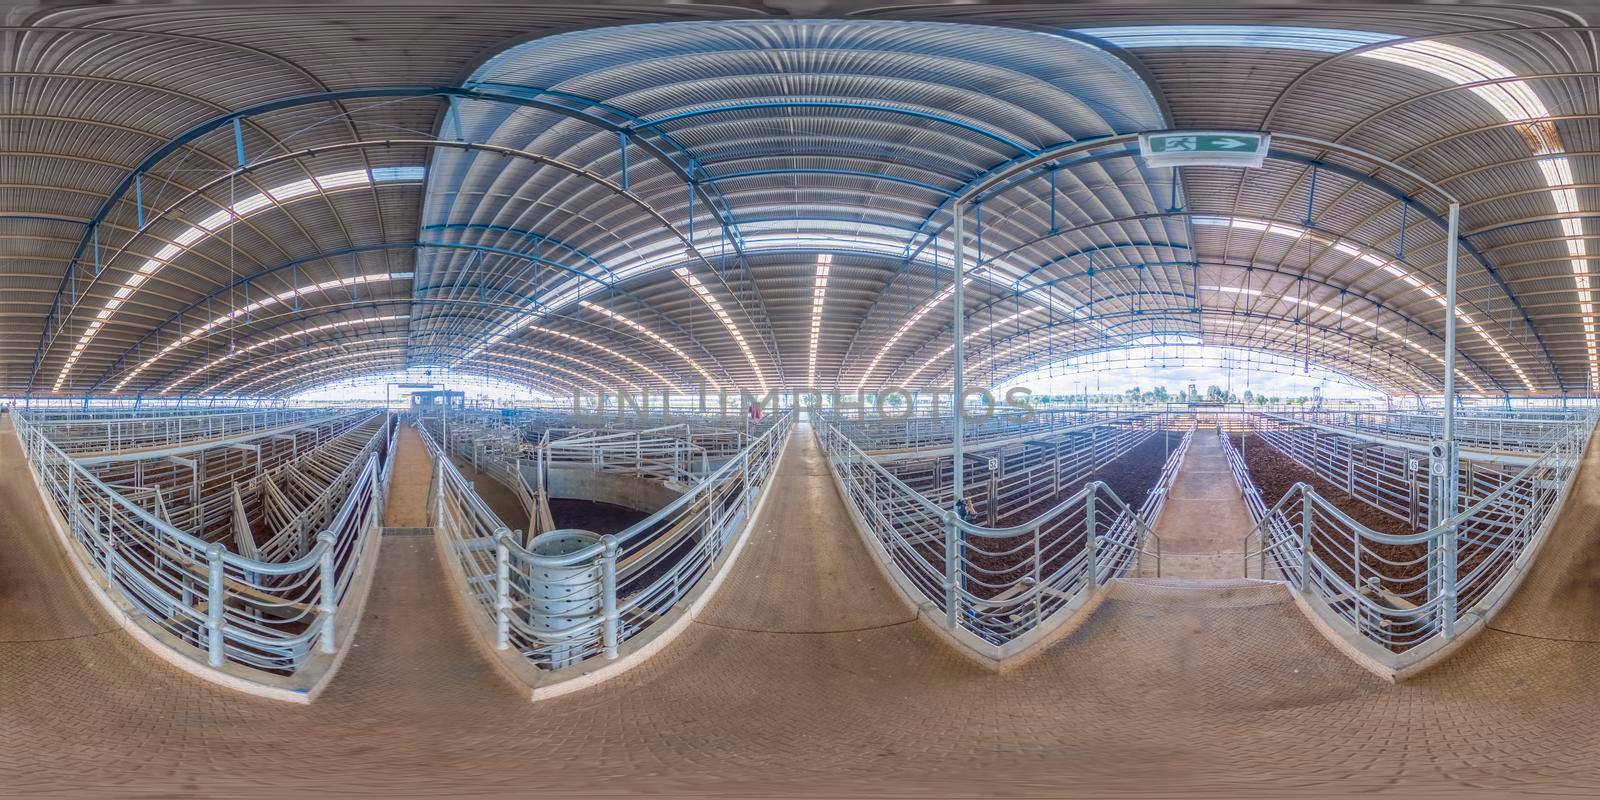 The Central West Livestock Exchange in regional Australia by WittkePhotos